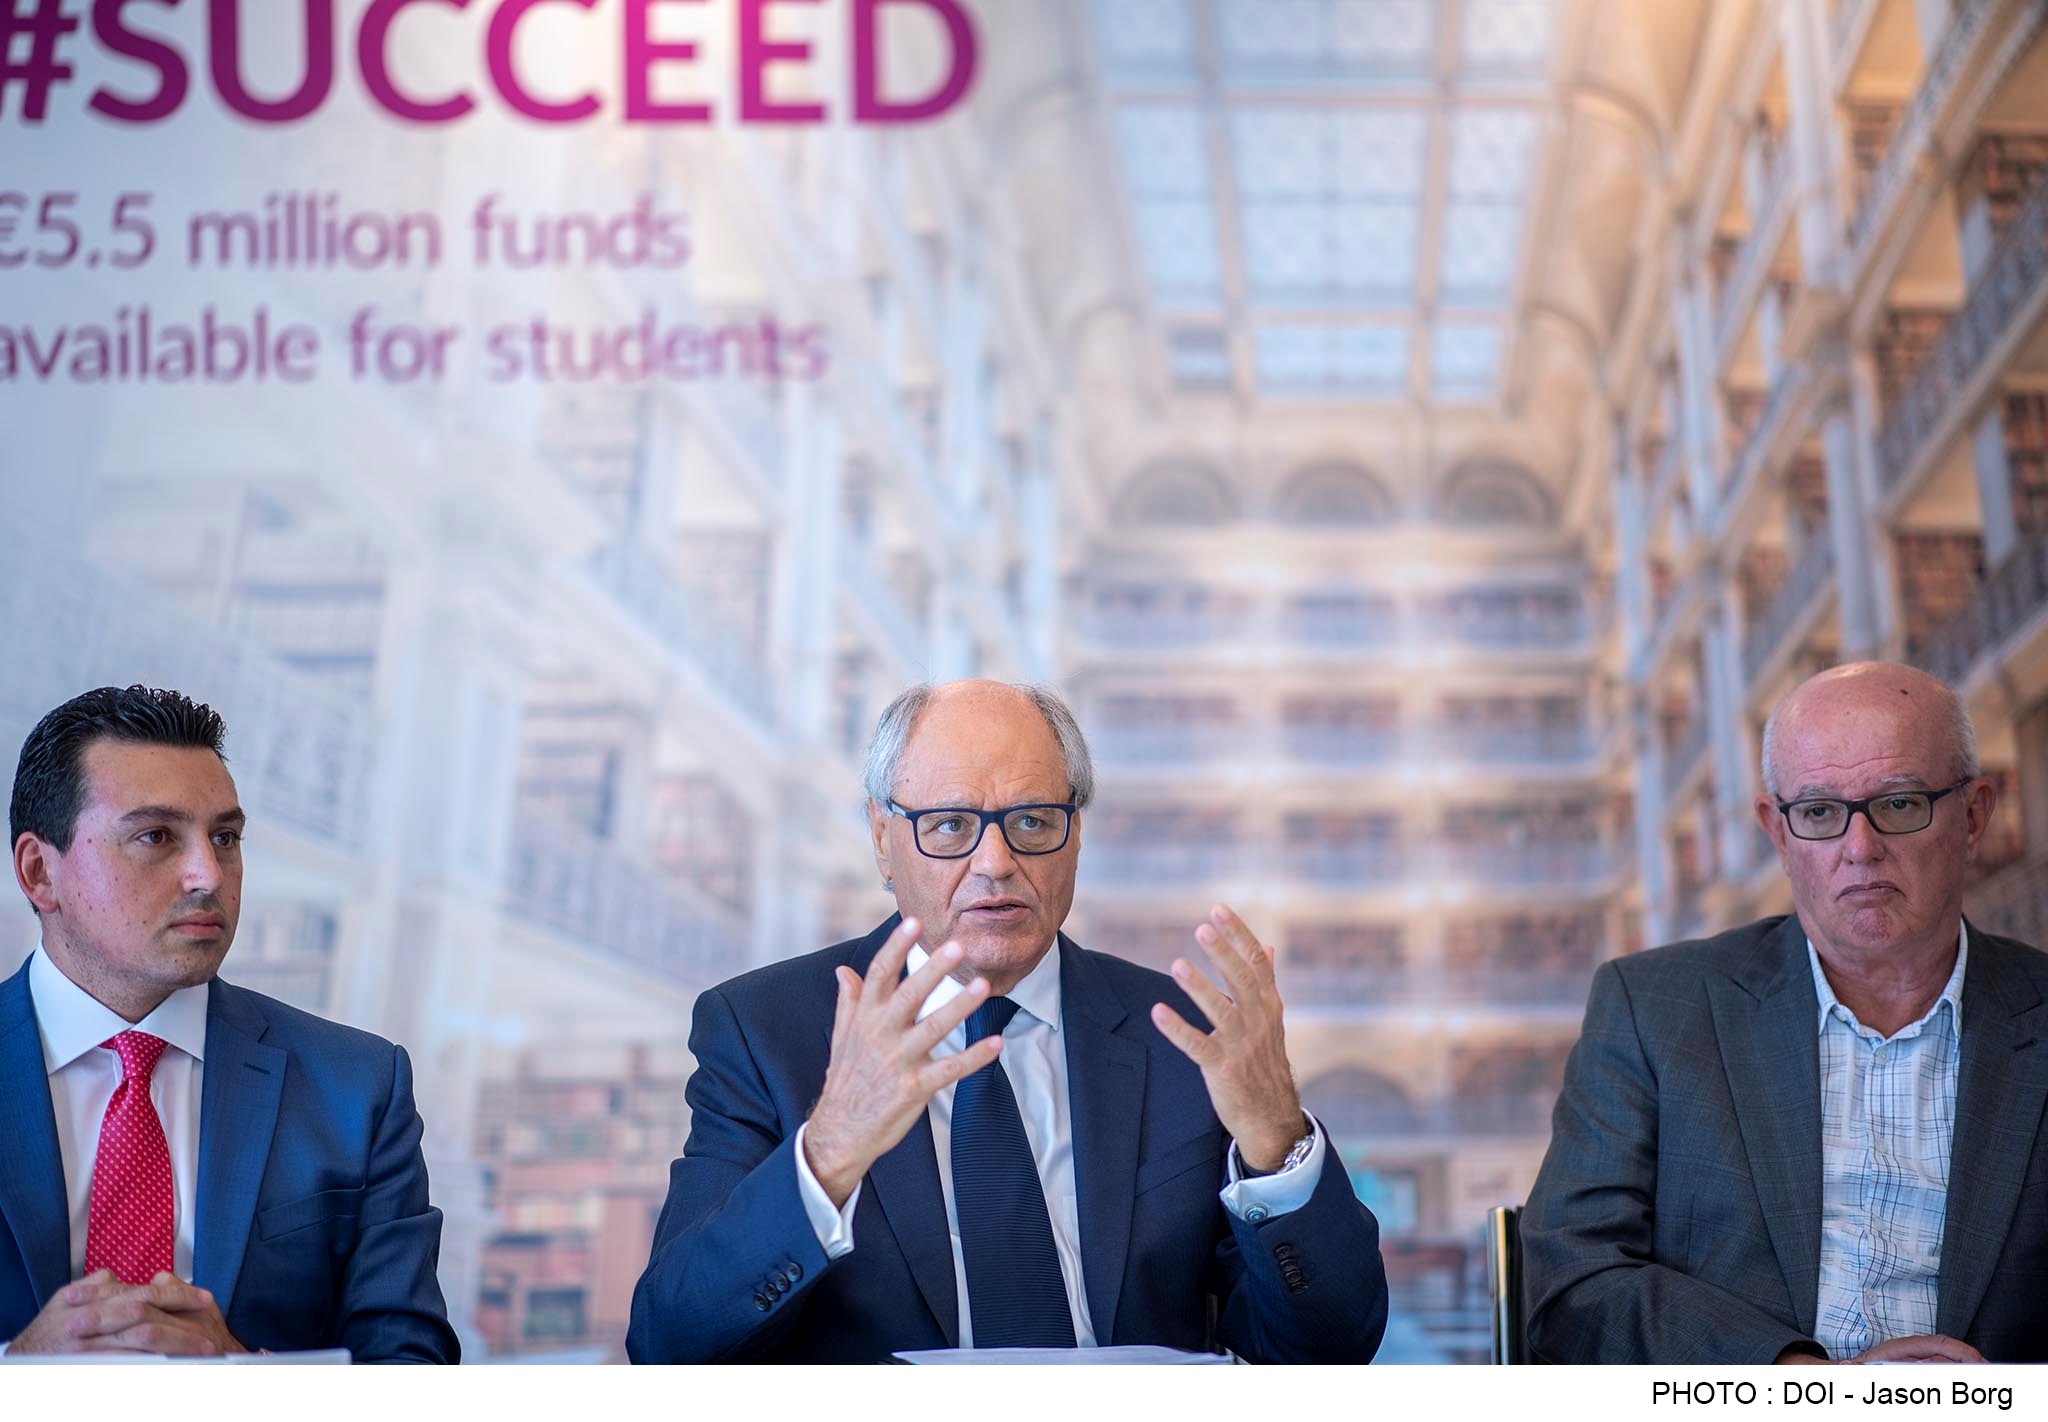 New financial incentives for further studies from Bank of Valletta and the Malta Development Bank